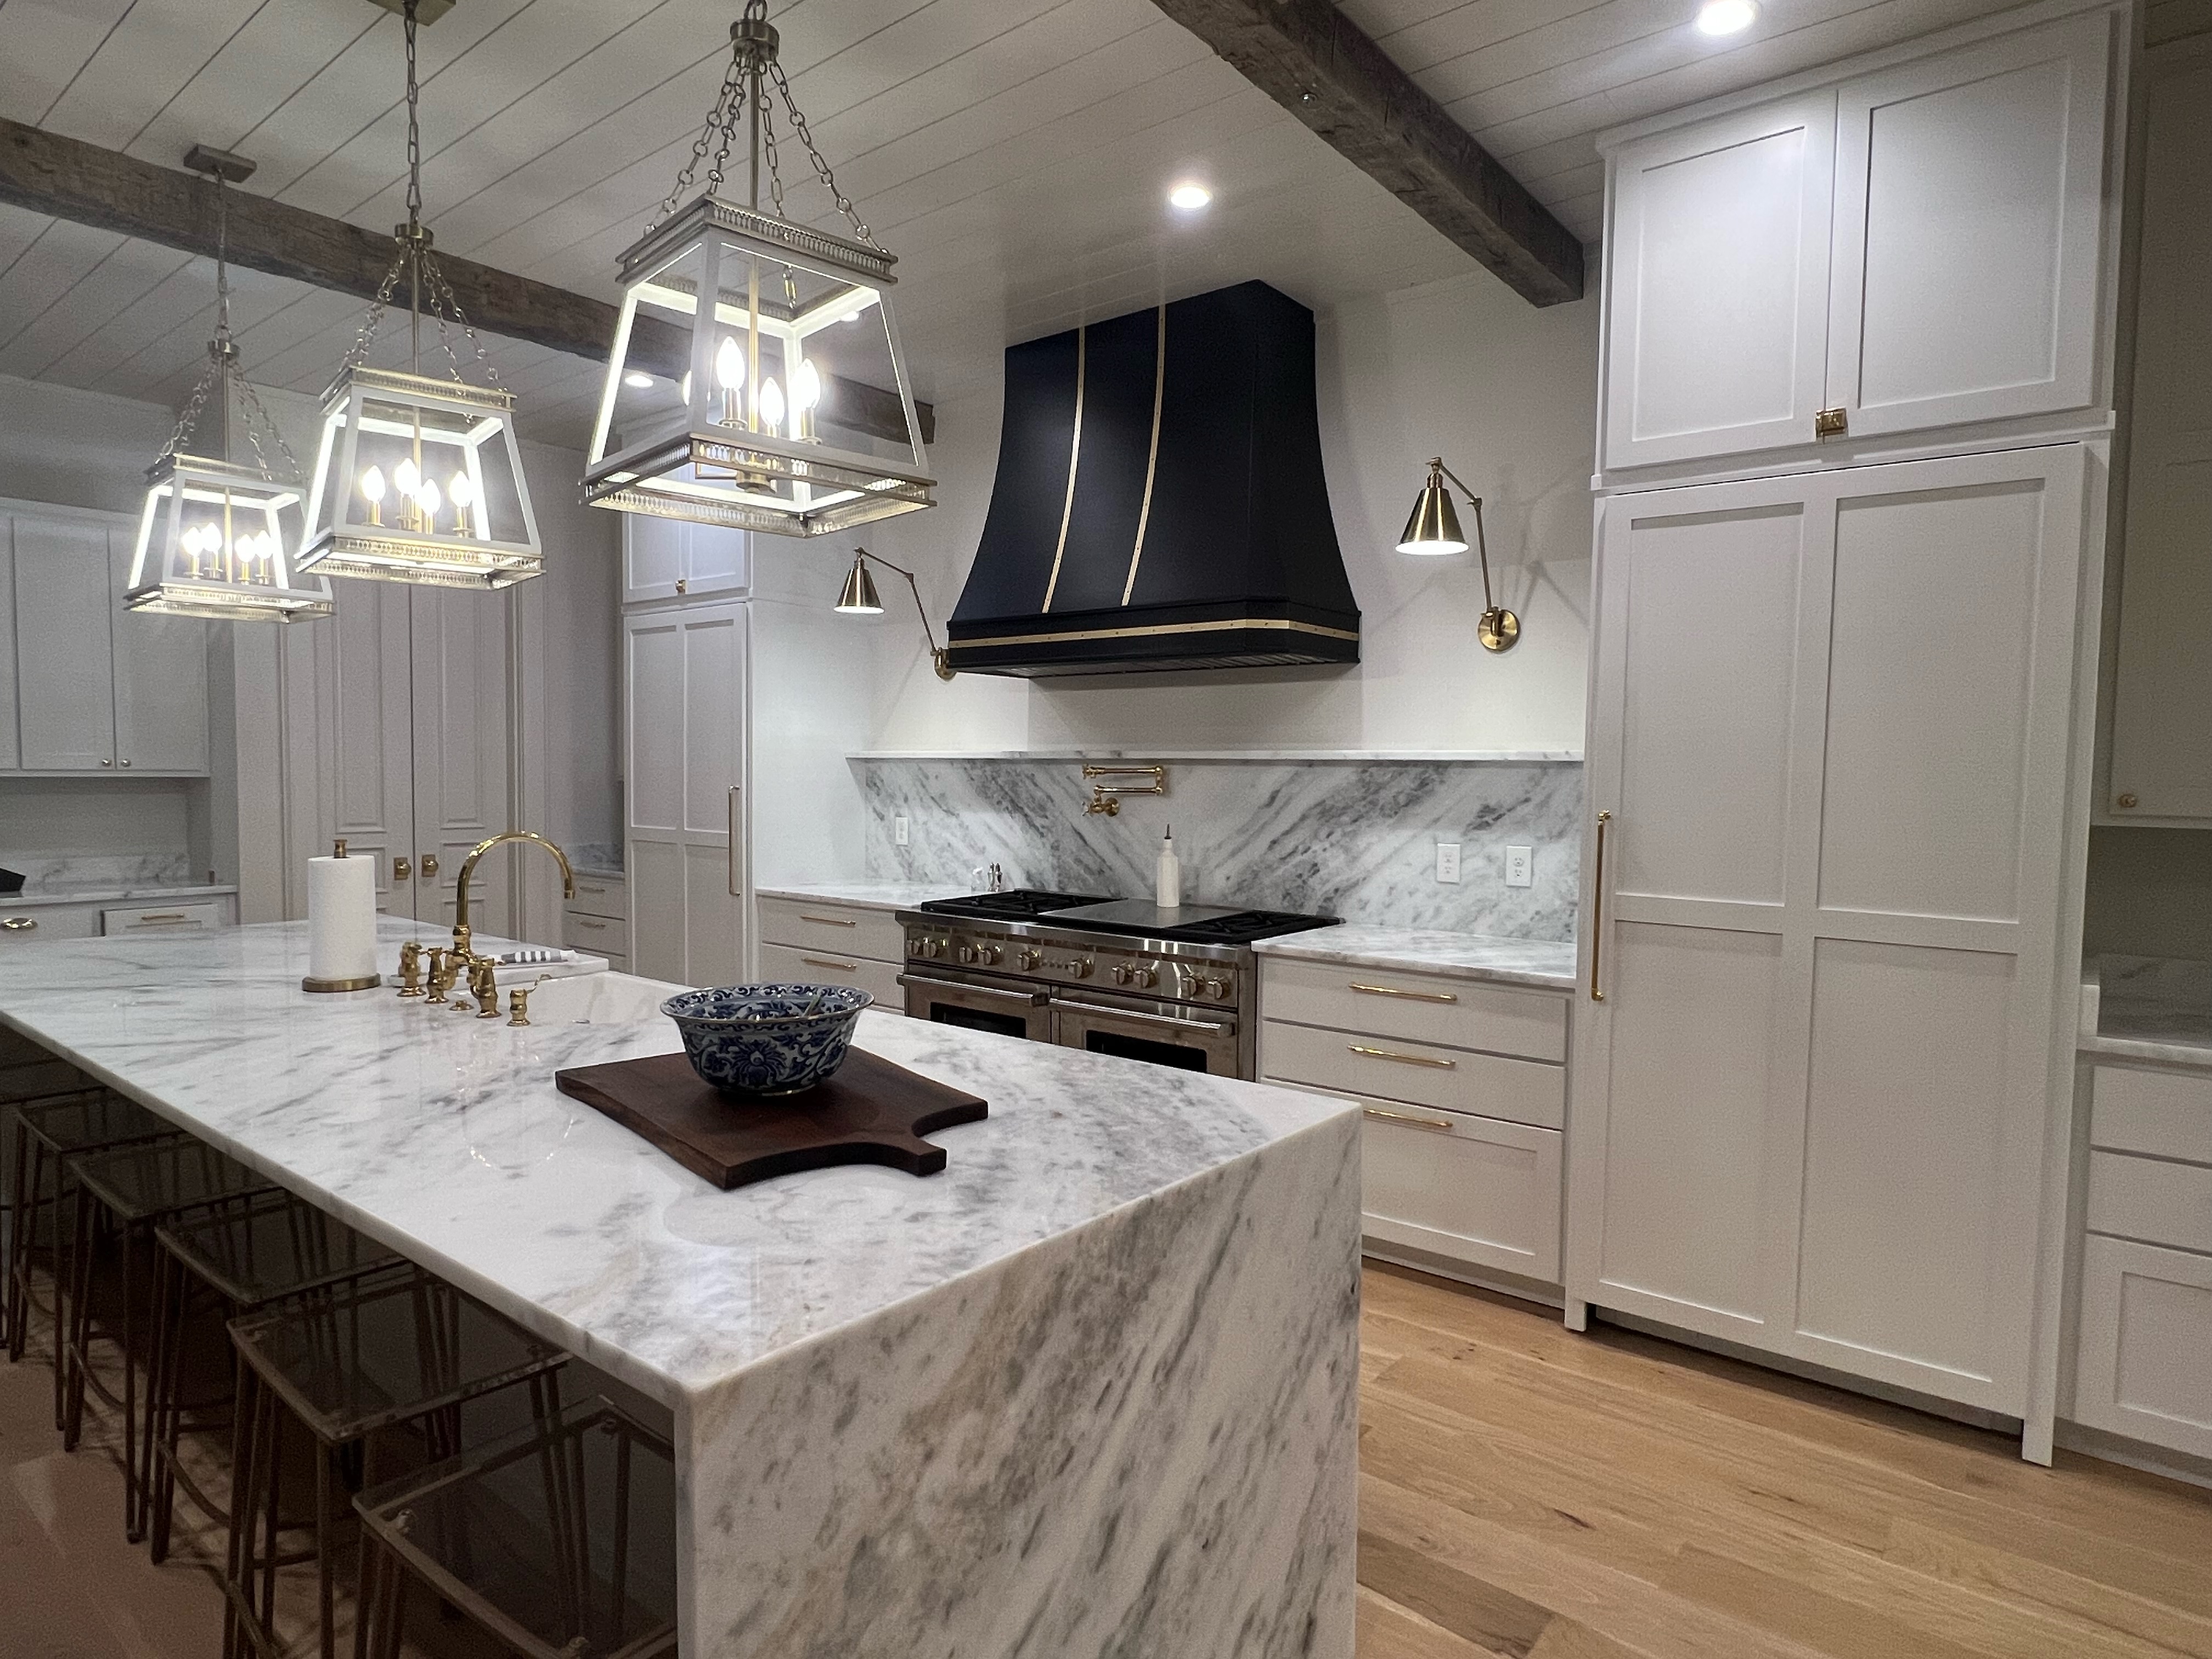 Costal-inspired kitchen design, consider incorporating white kitchen cabinets and marble countertops with a stunning marble backsplash